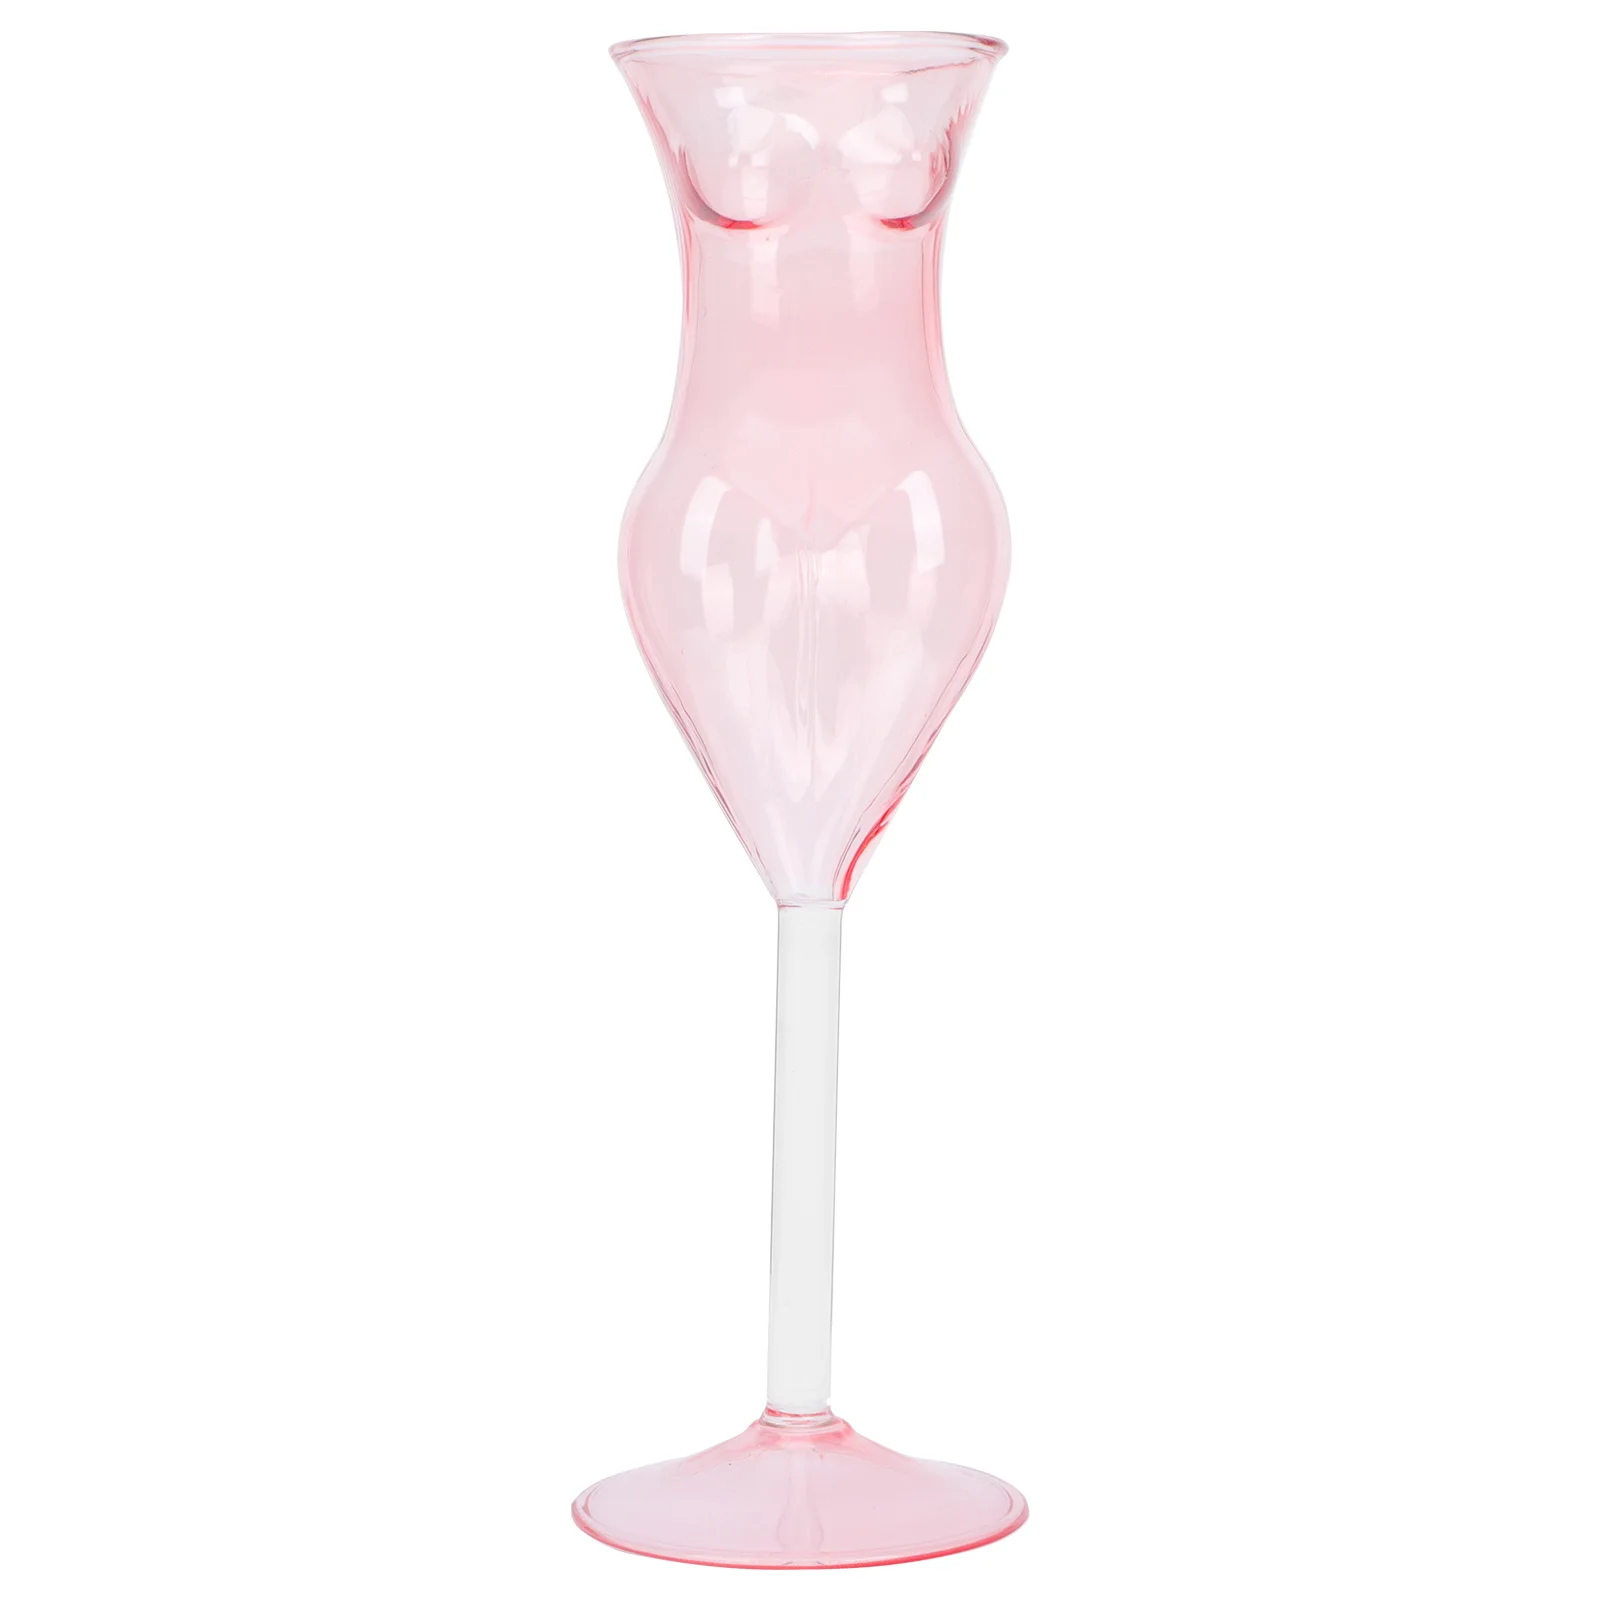 

Human Glass Cocktail Champagne Cup Whiskey Drinking Novelty Goblet Adornment